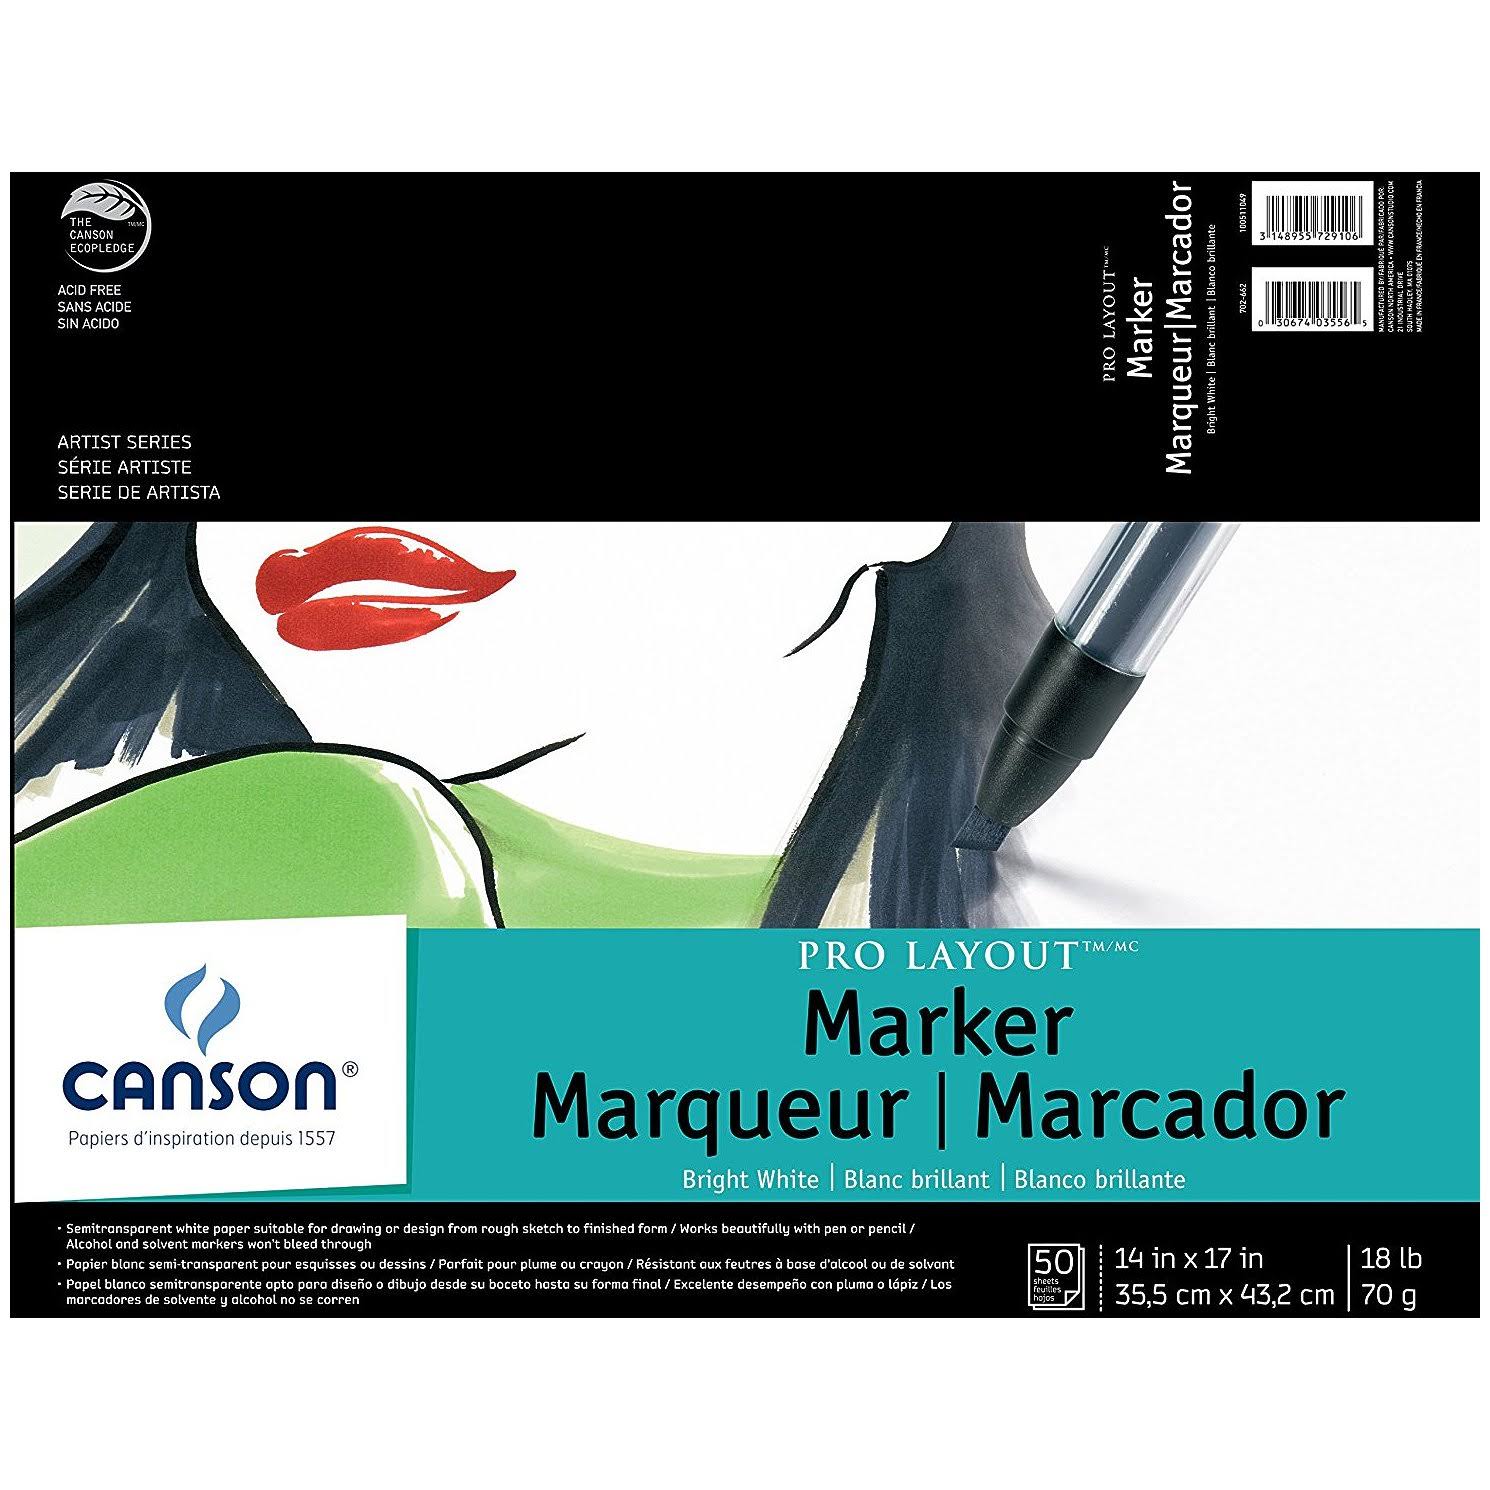 Canson Marker Pro Layout Sheet Pad - 14" X 17", 50 Sheets, Fold Over